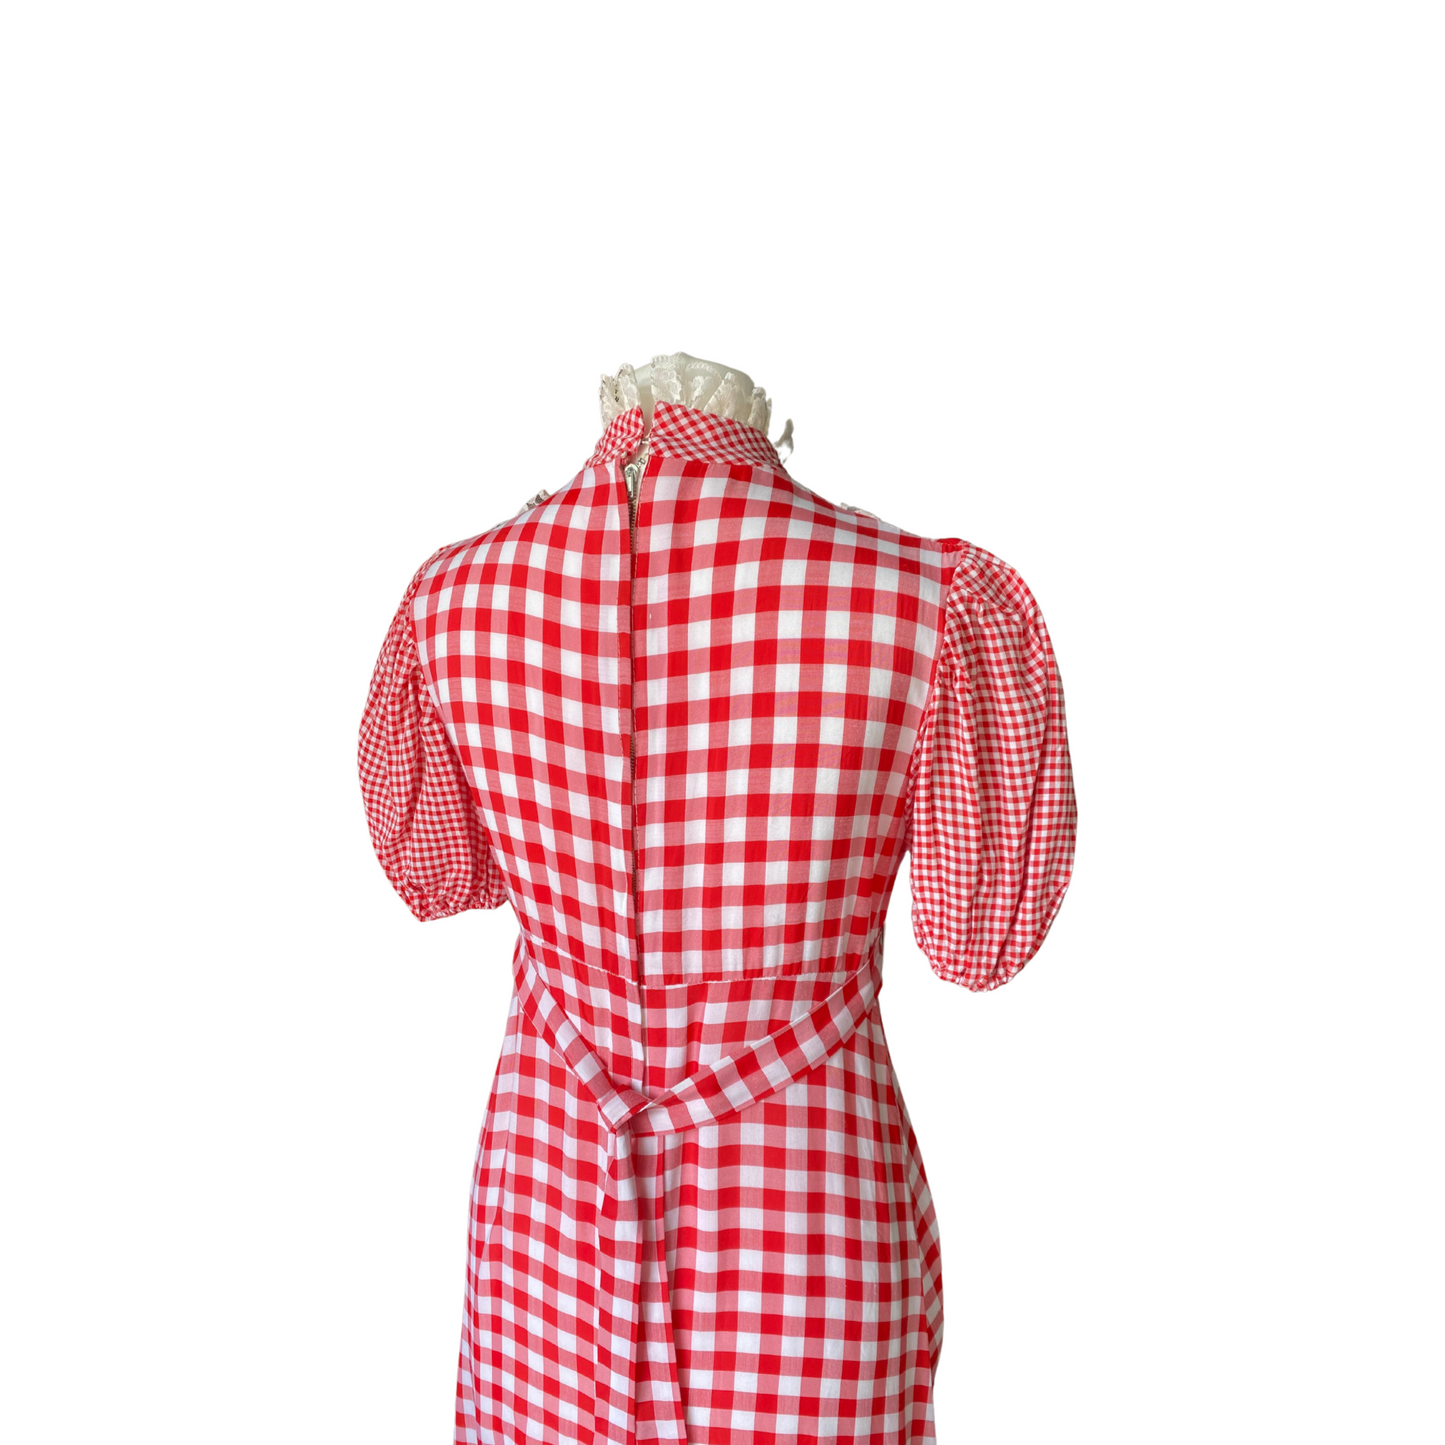 70s red and white gingham, puffed sleeved maxi dress. Approx U.K. size 8